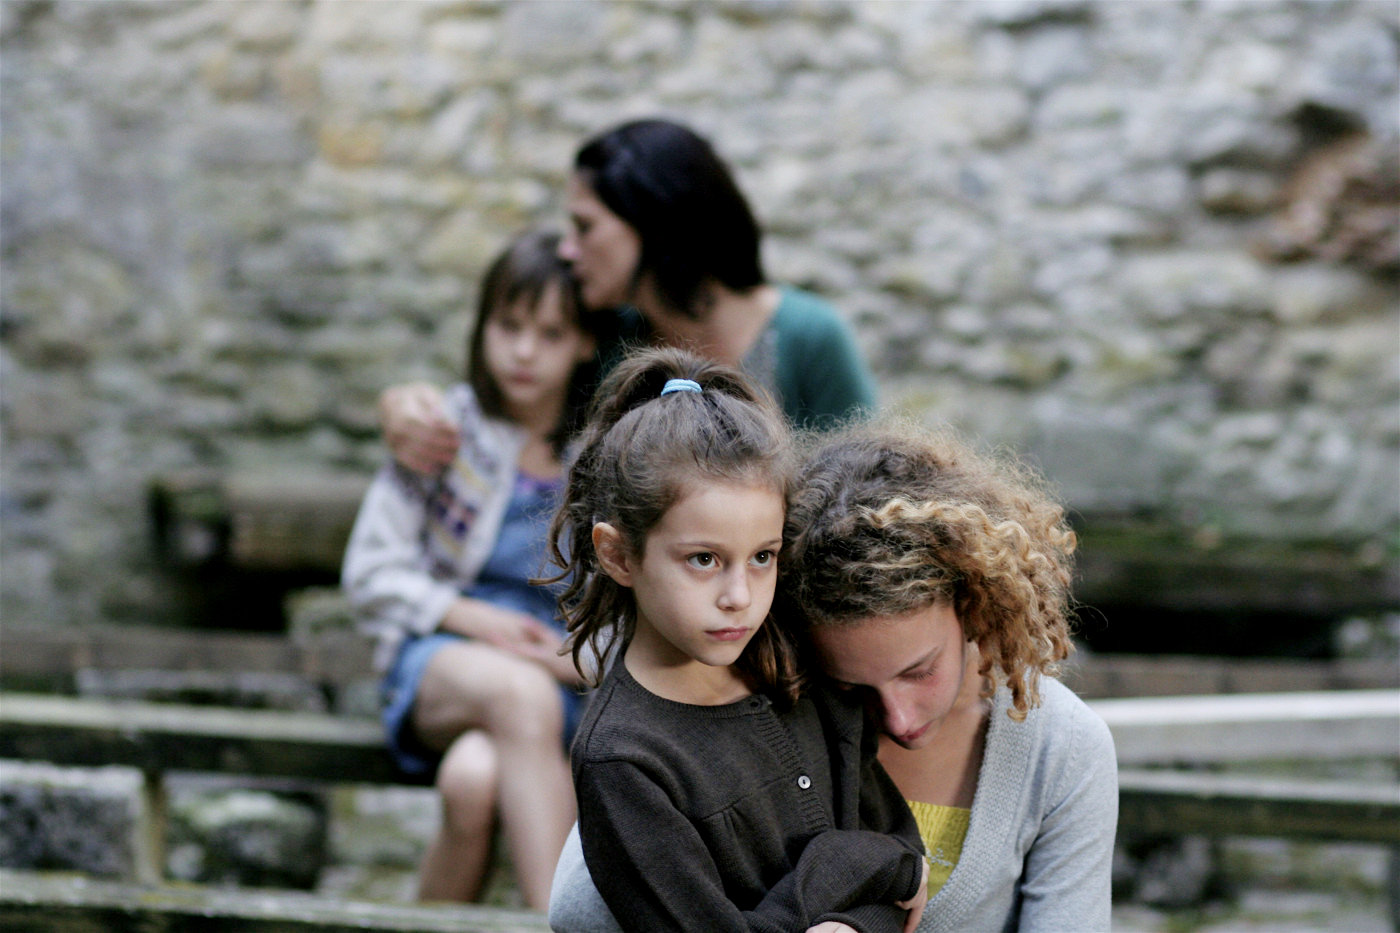 Manelle Driss stars as Billie Canvel and Alice de Lencquesaing stars as Clemence Canvel in IFC Films' The Father of My Children (2010)